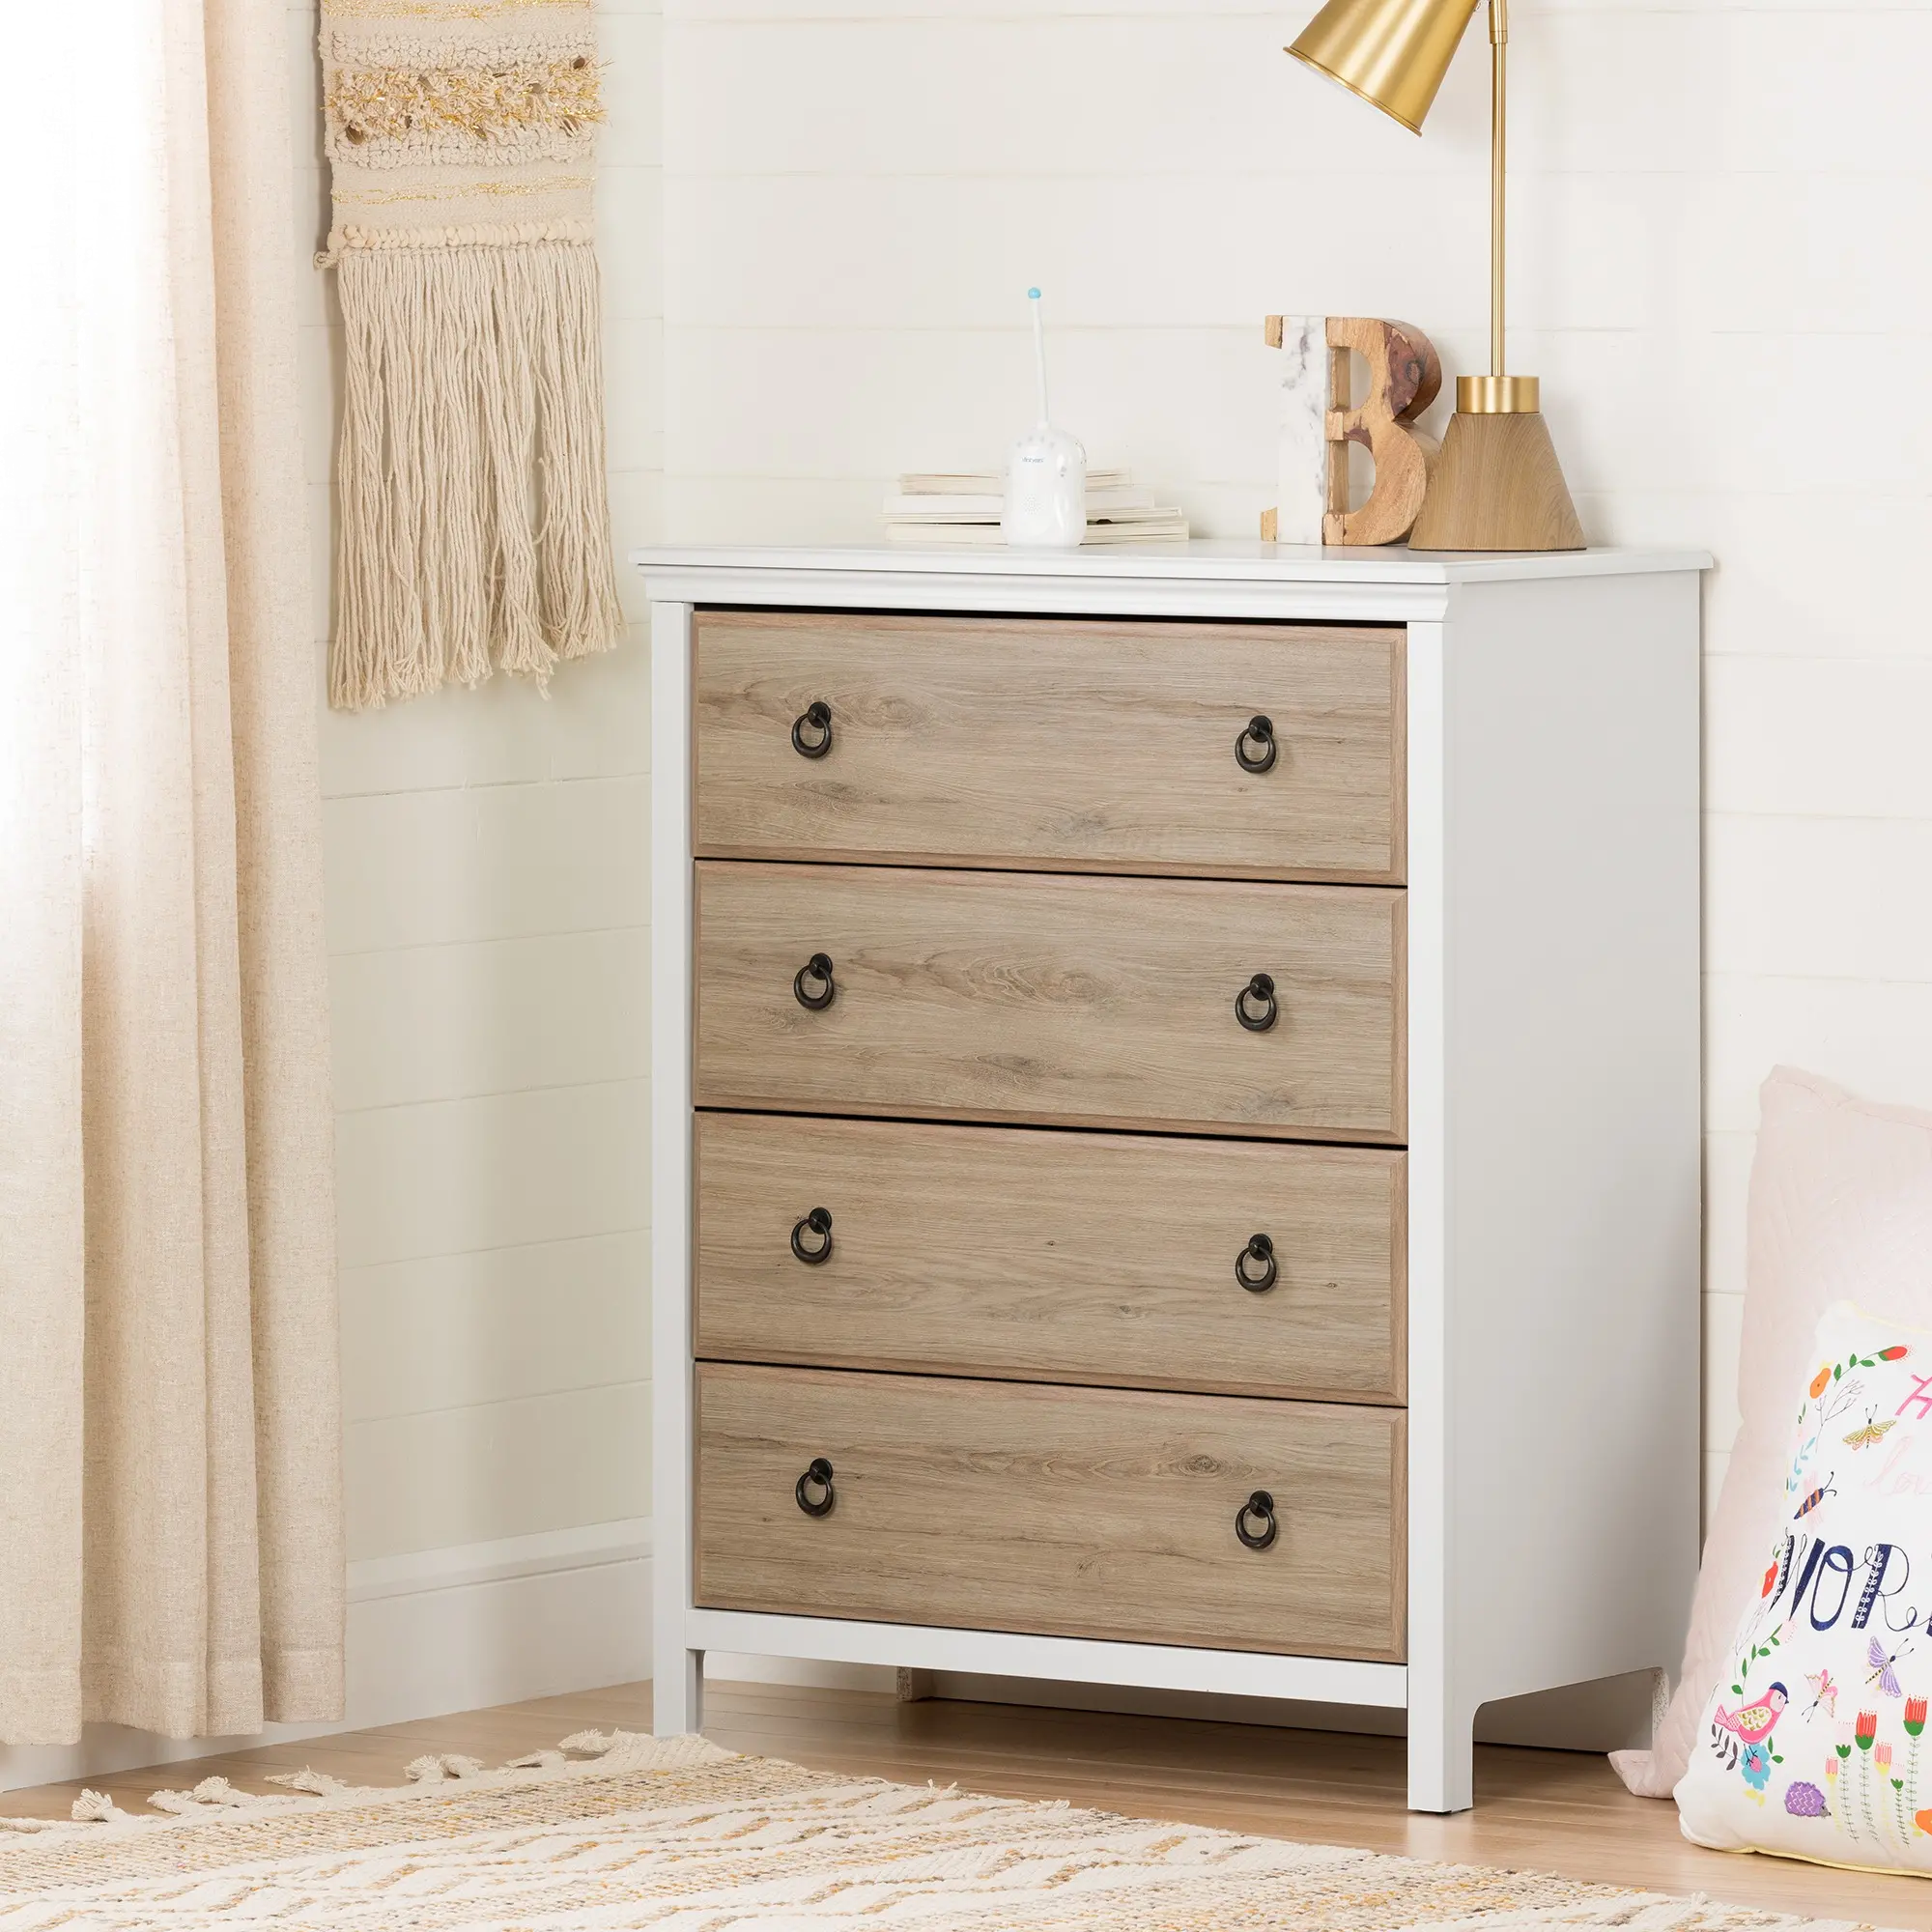 Catimini Four-Drawer Chest - South Shore